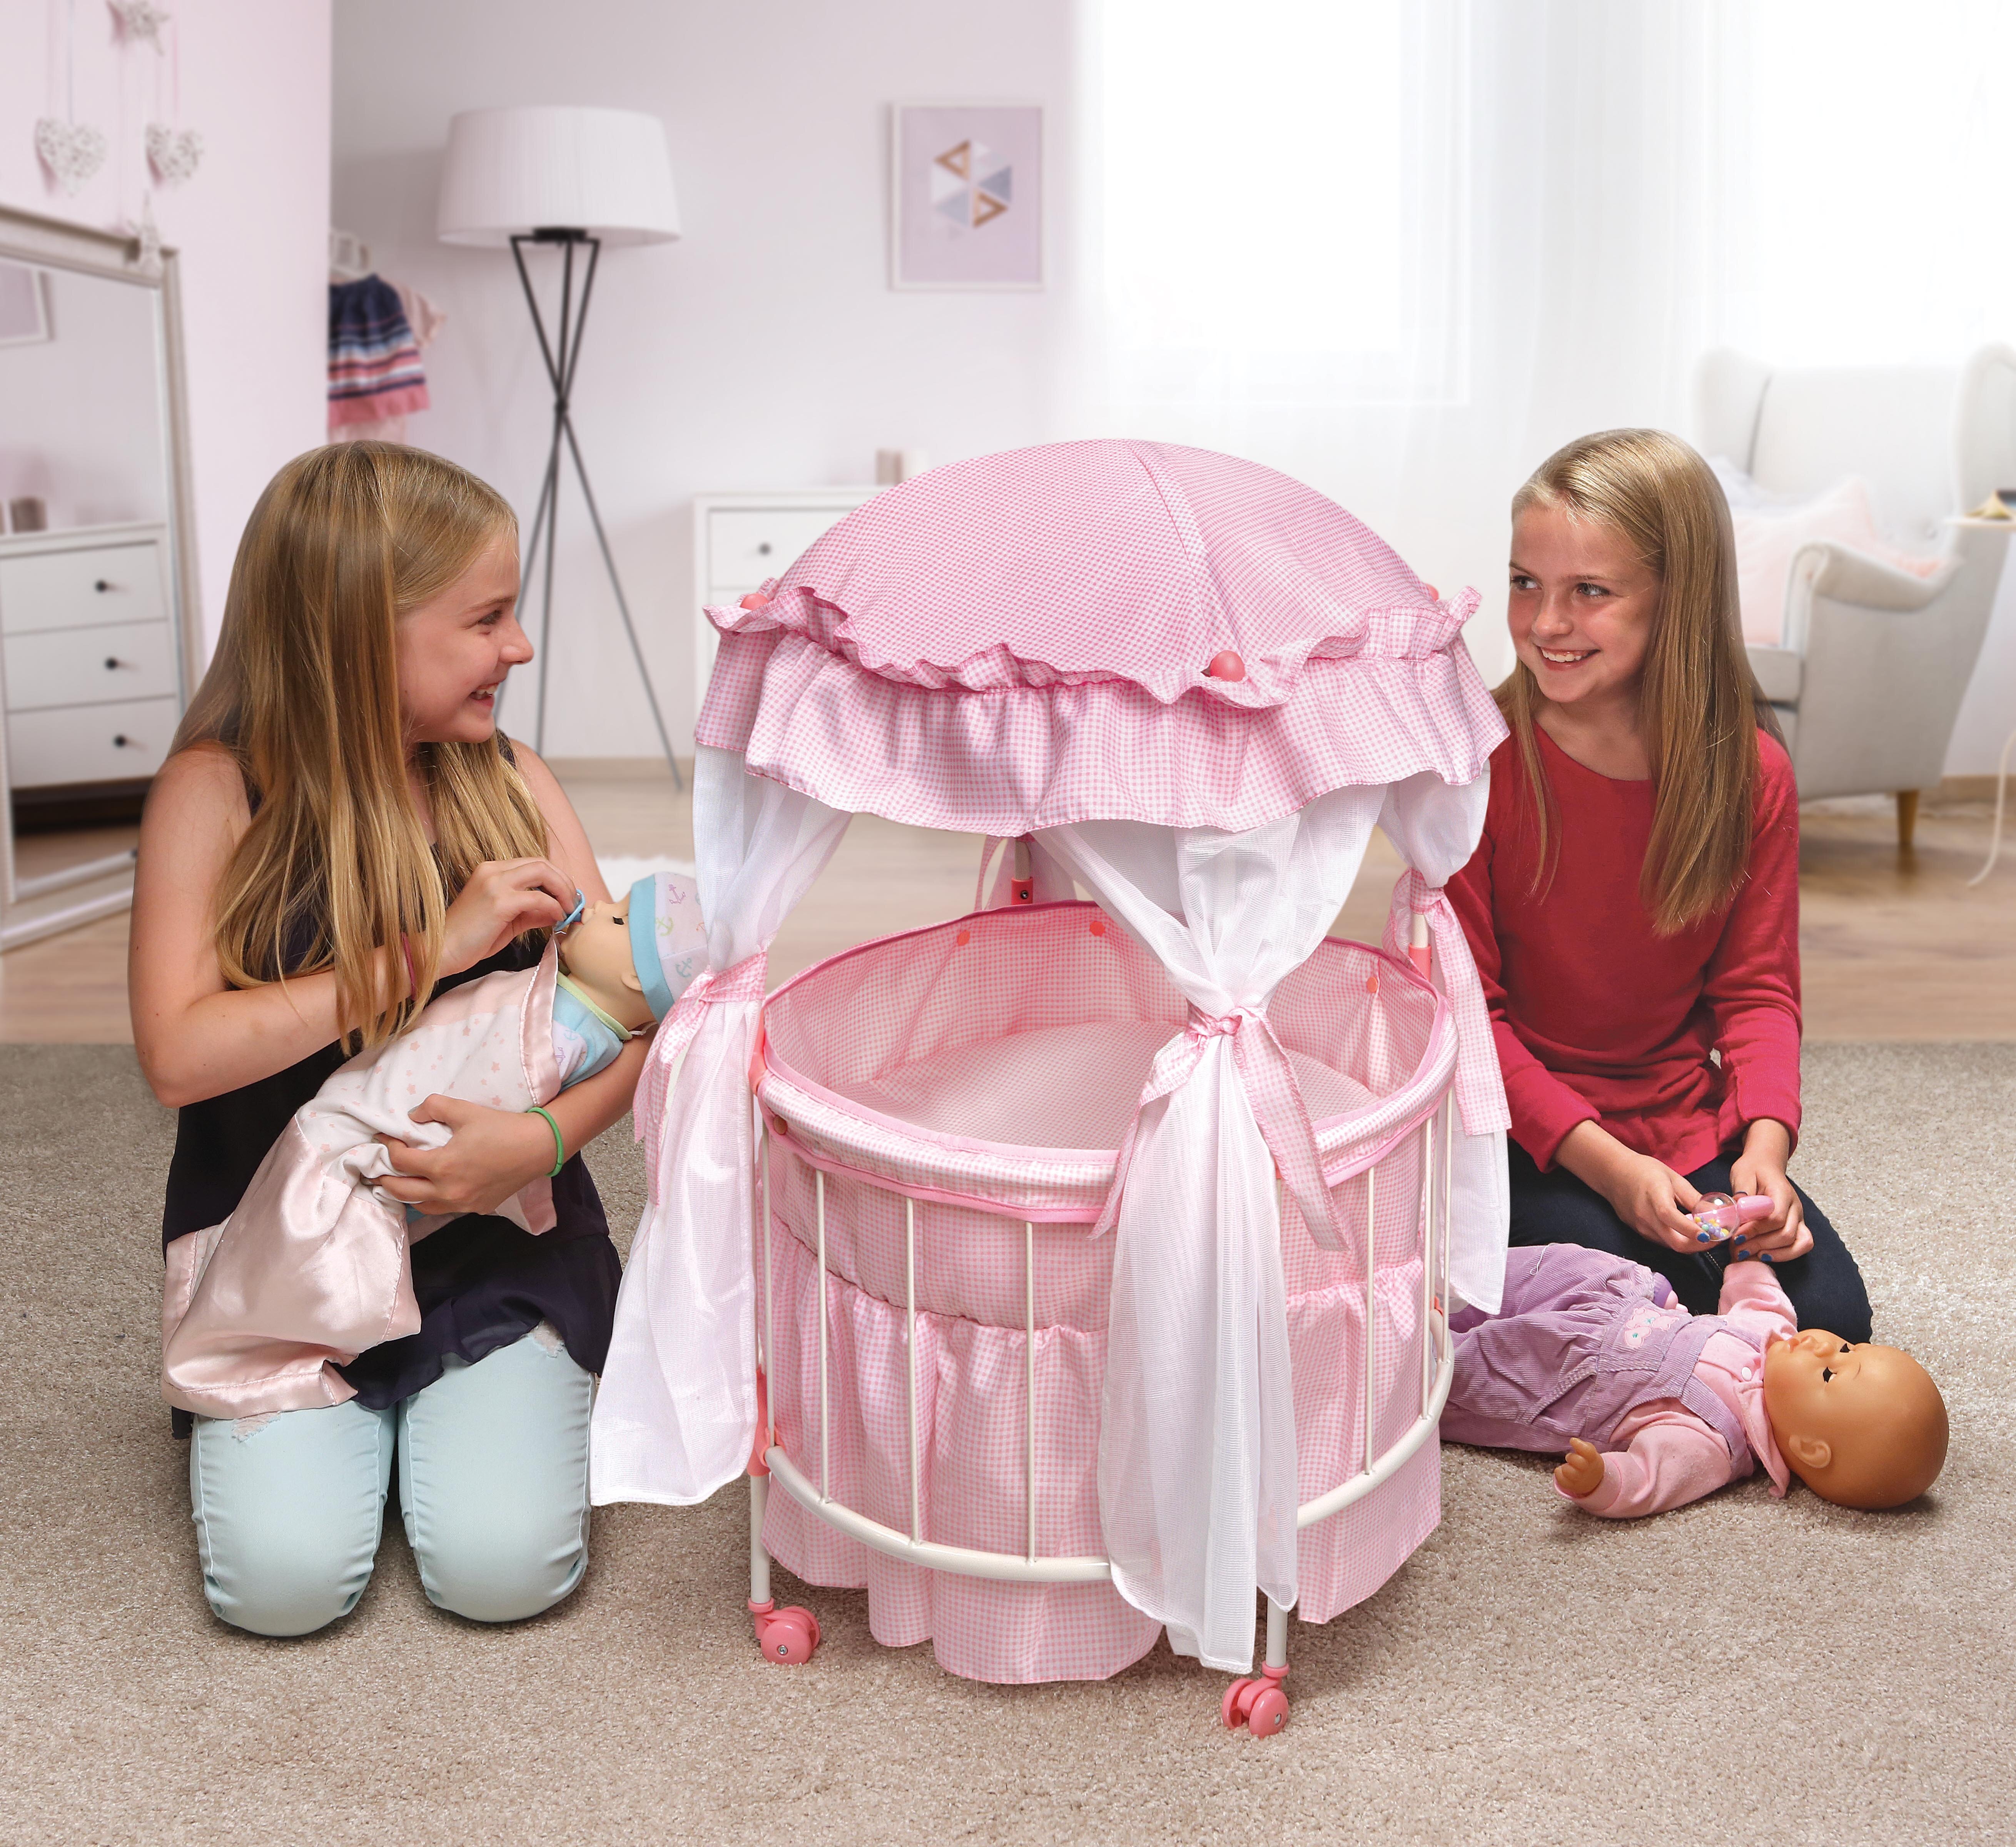 baby doll canopy bed